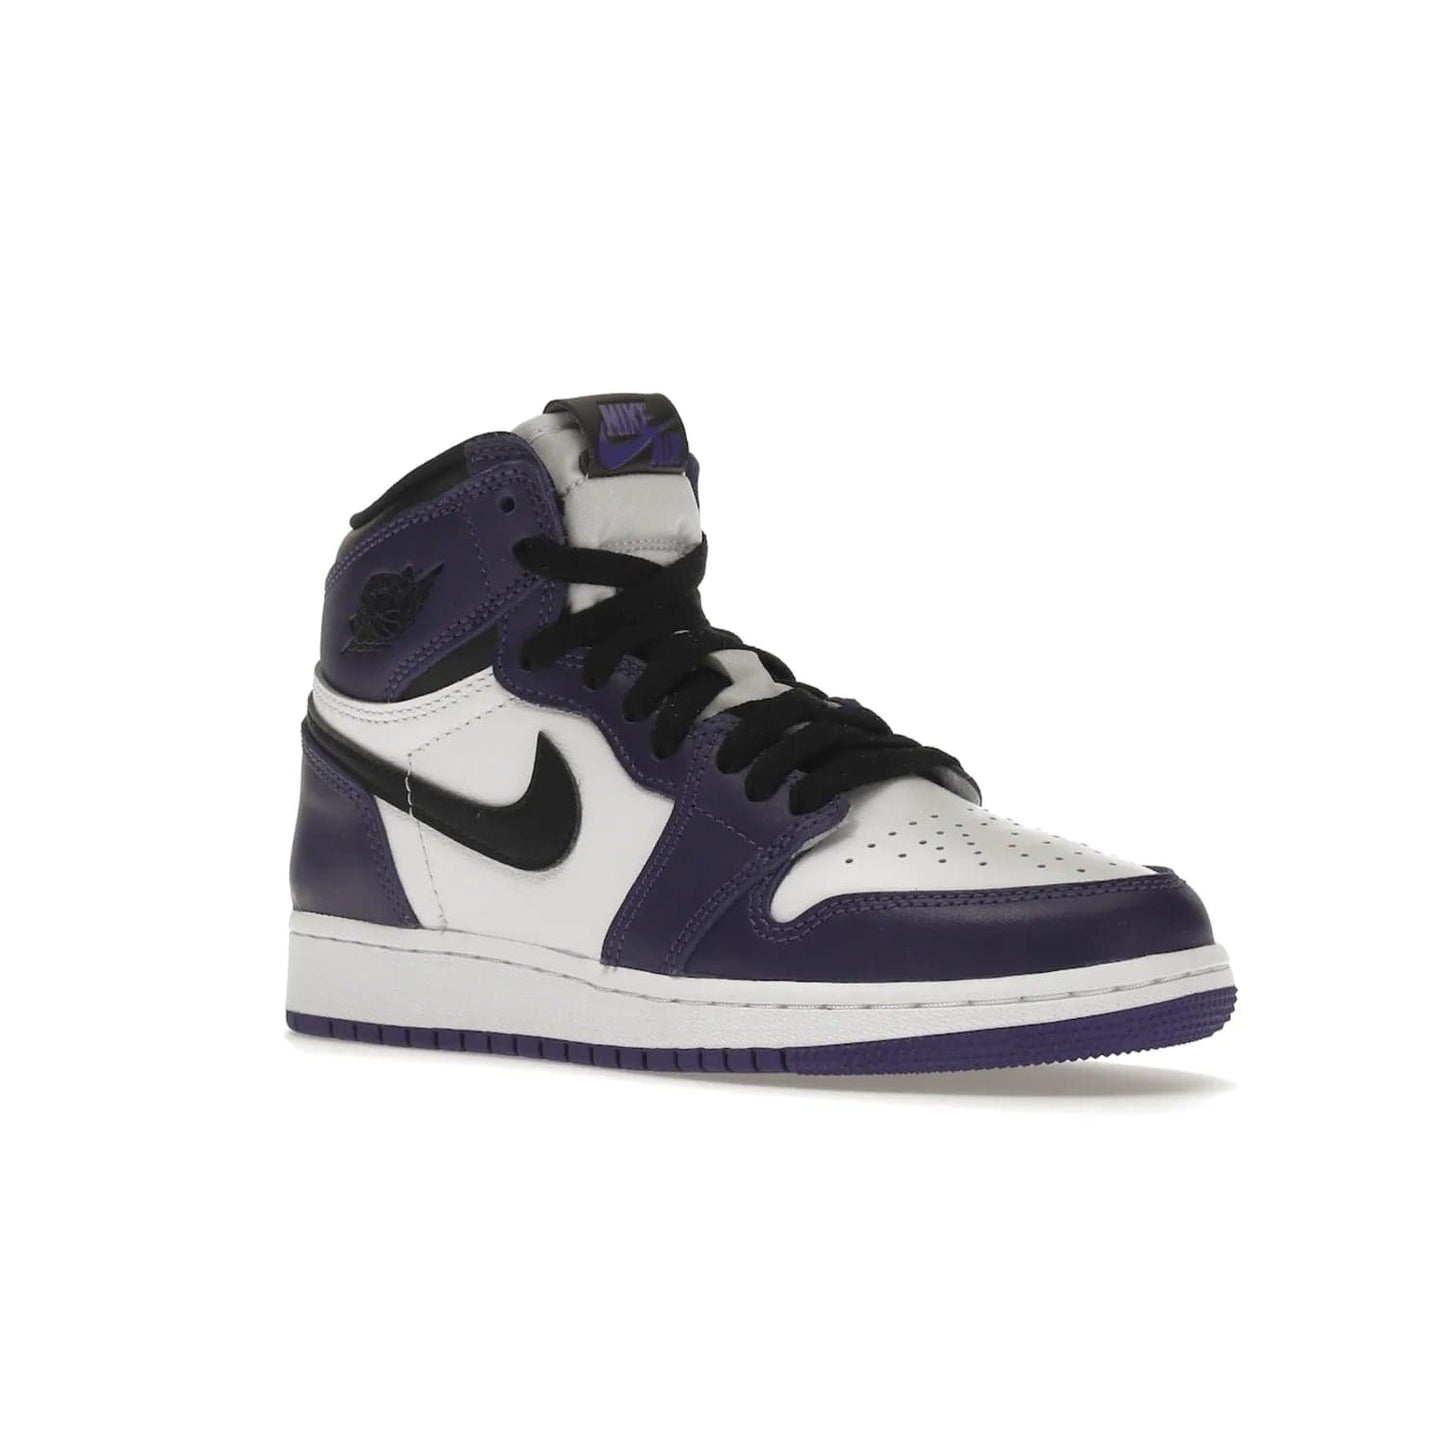 Jordan 1 Retro High Court Purple White (GS) - Image 5 - Only at www.BallersClubKickz.com - The Air Jordan 1 Retro High Court Purple is here and young sneaker heads can show off classic style. Features a white tumbled leather upper, black swoosh, purple overlays, black collar with purple overlay, white tongue, black patch with purple Nike Air logo and swoosh, white midsole, and purple rubber outsole with circular pattern.